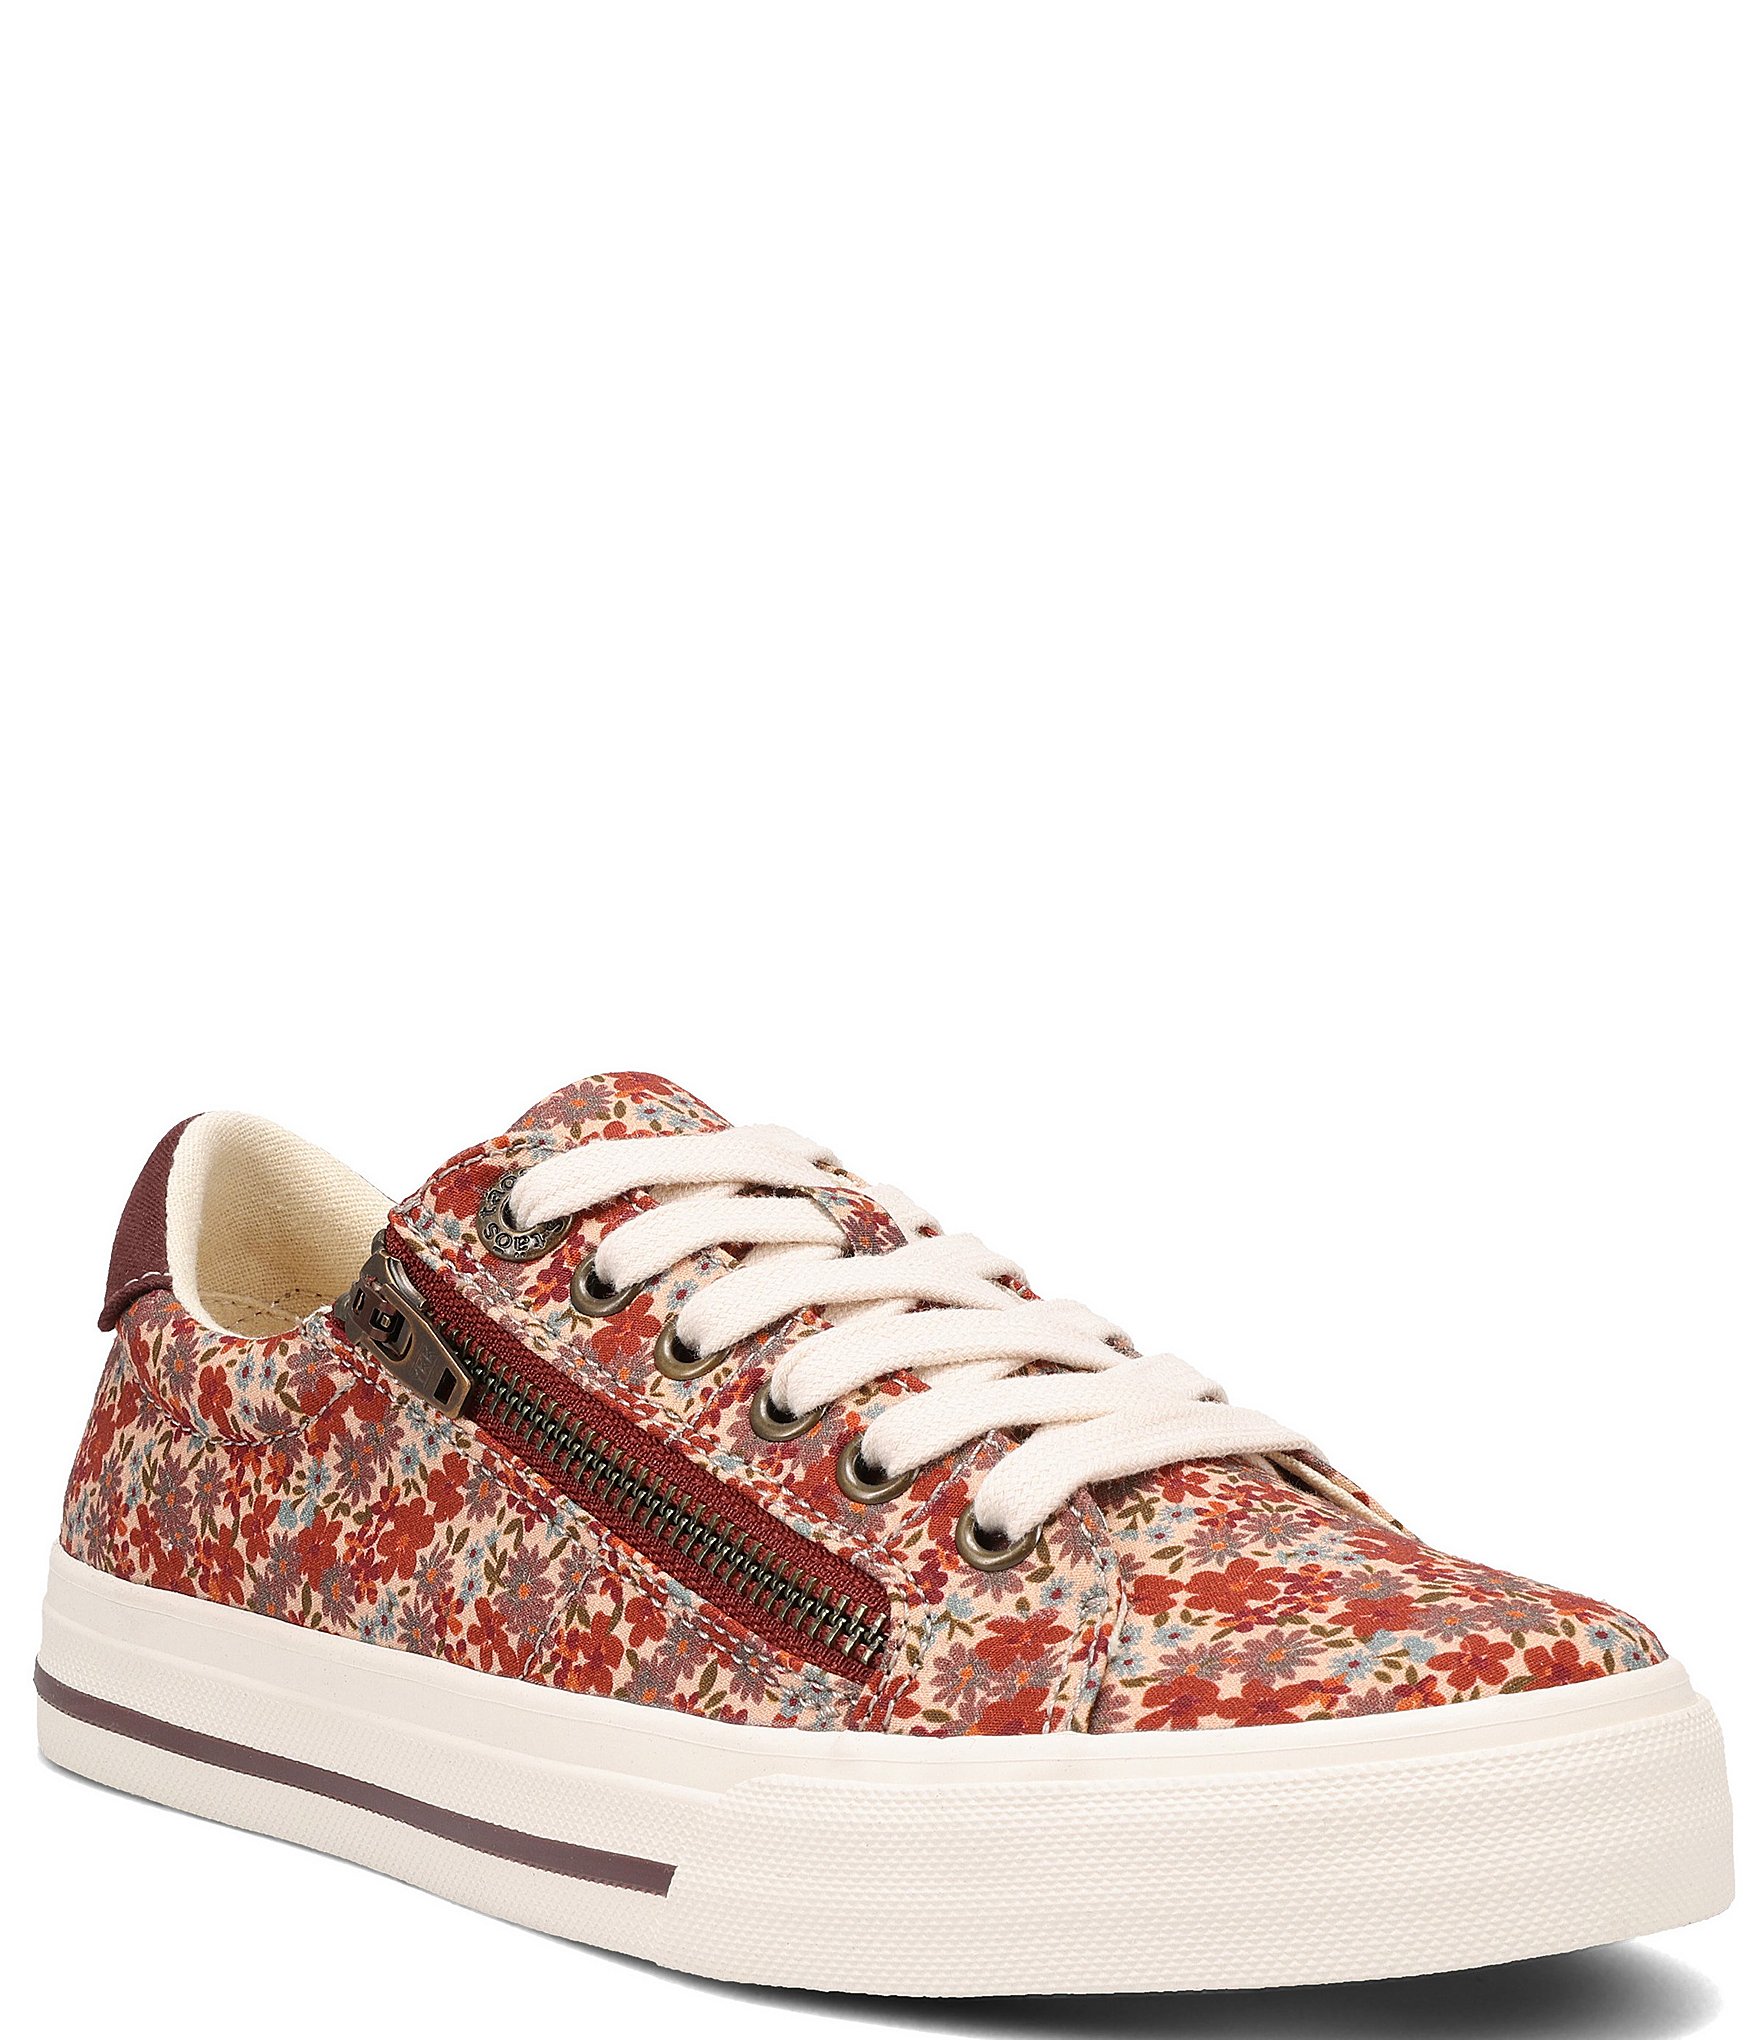 Floral Marvel: Women's Flower Print Mesh Sneakers for Breathable Comfo